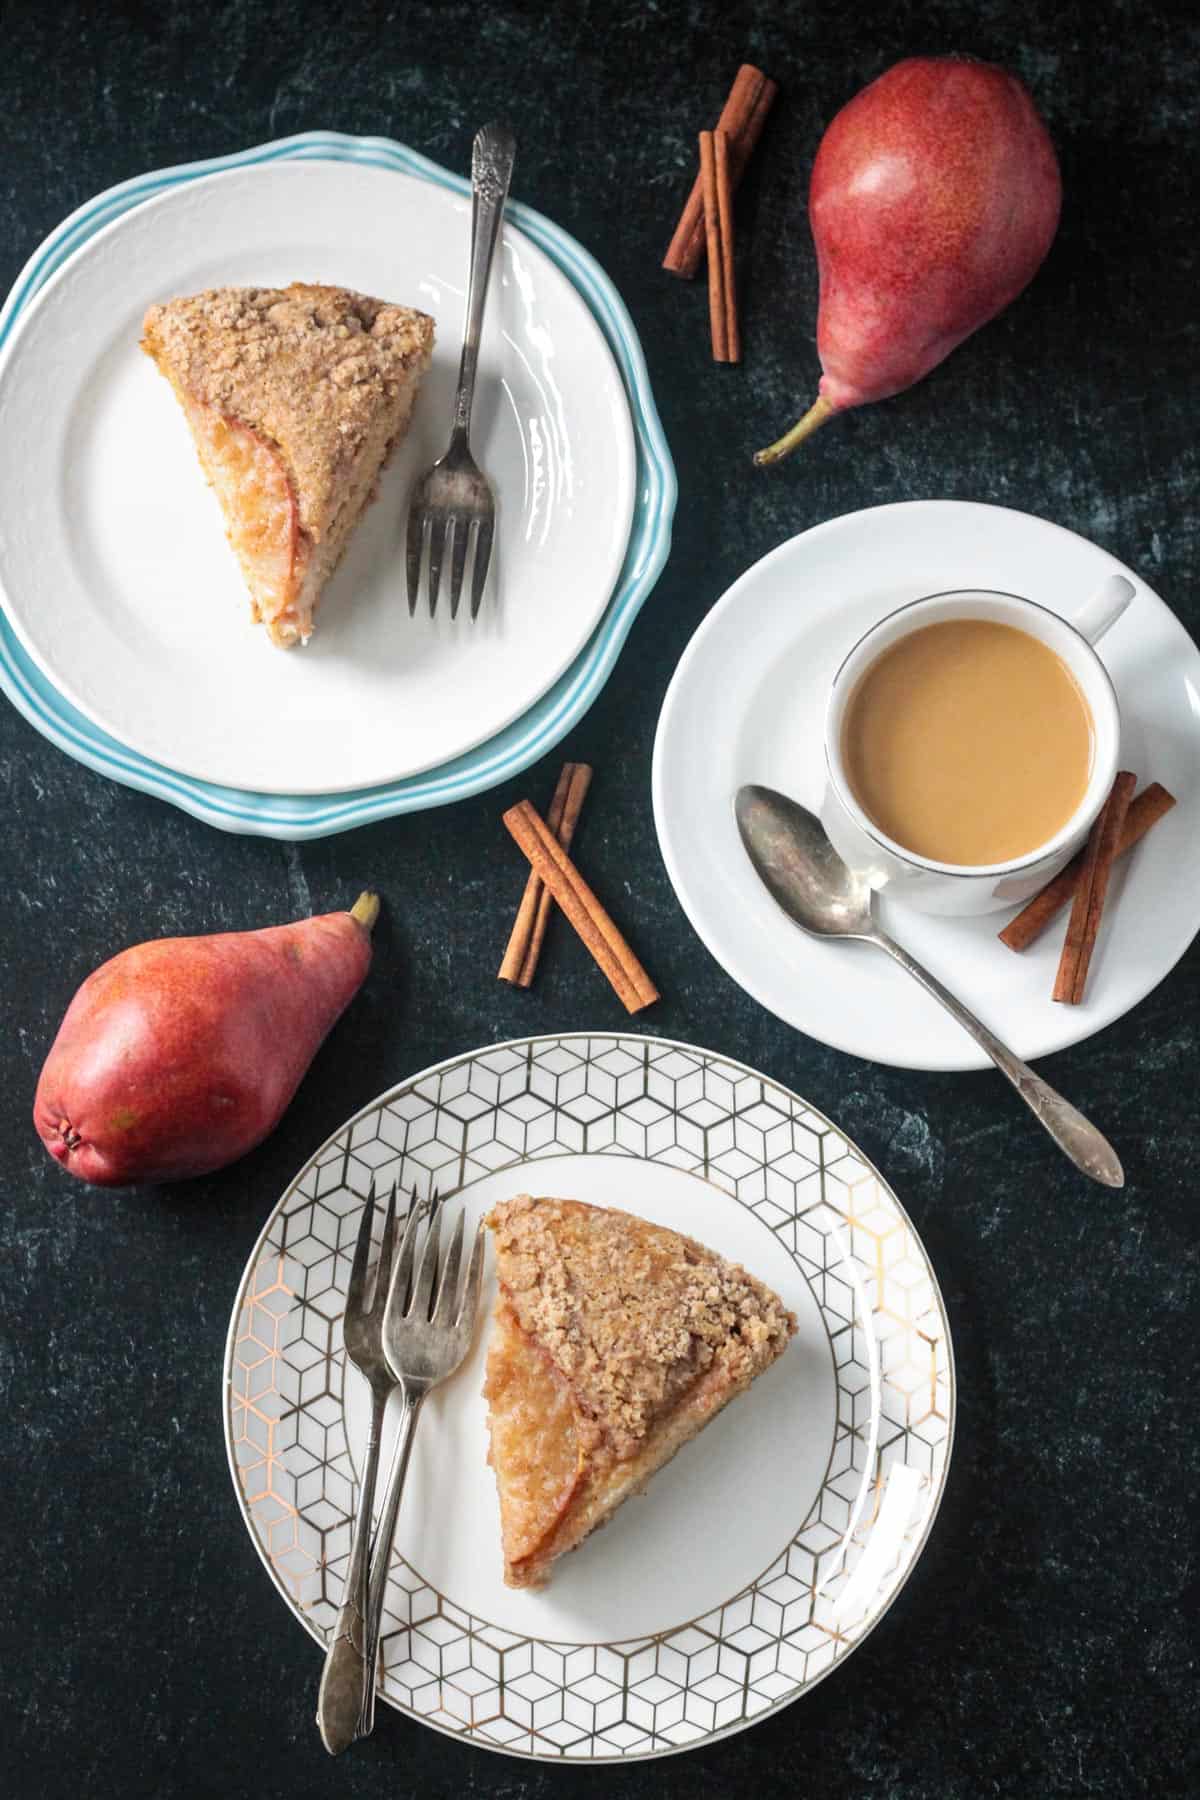 Two plates each with a slice of spiced pear cake next to a cup of coffee.